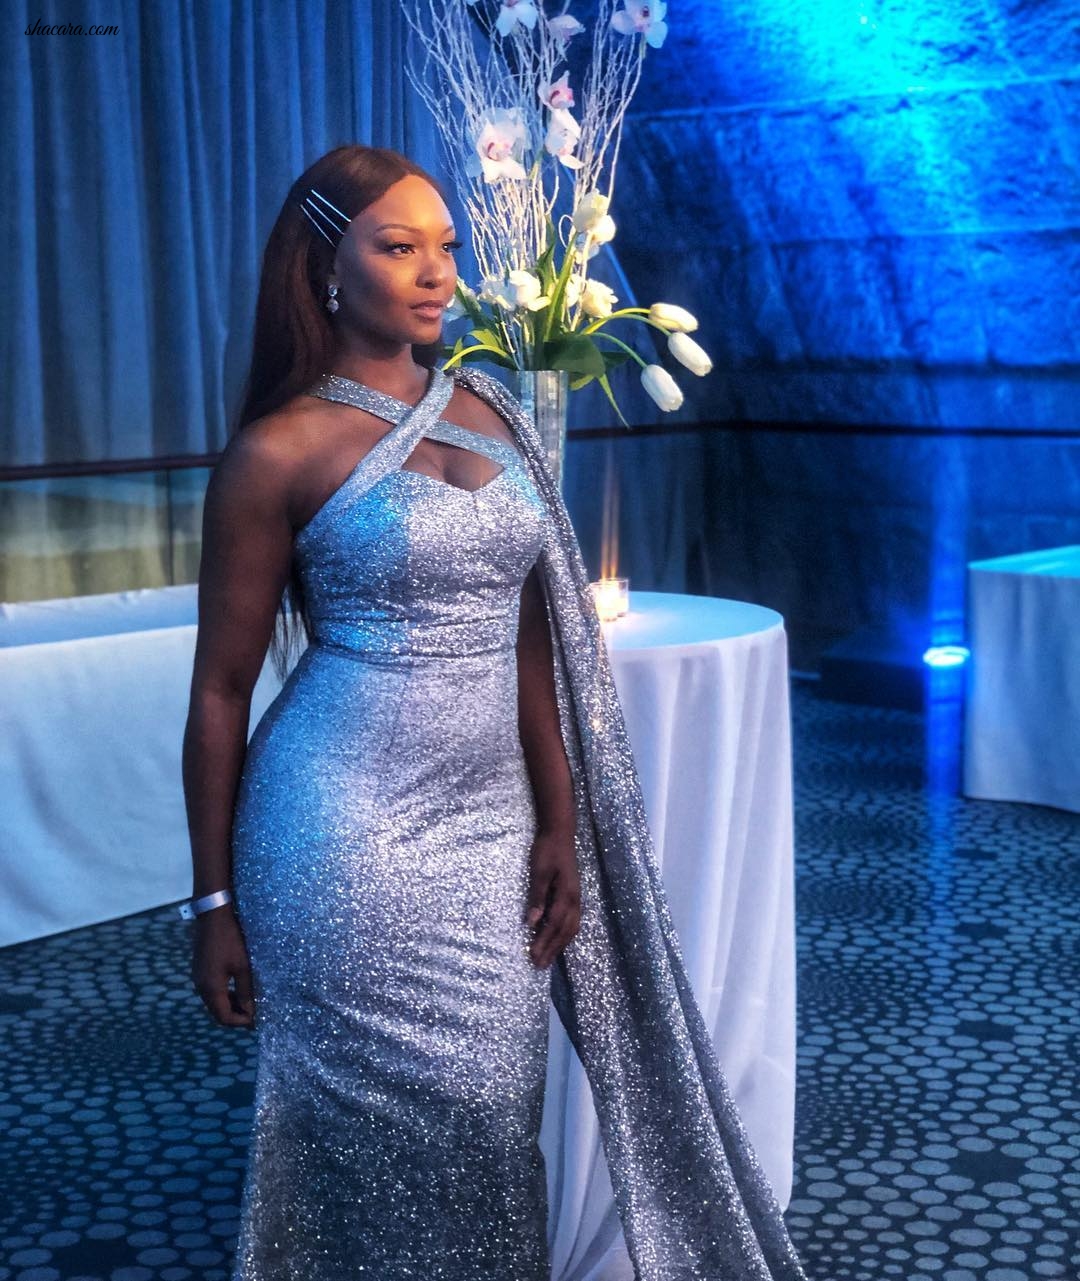 Osas Ighodaro Ajibade Looks Angelic In This Sparkling Gown At The 2019 WASH Gala